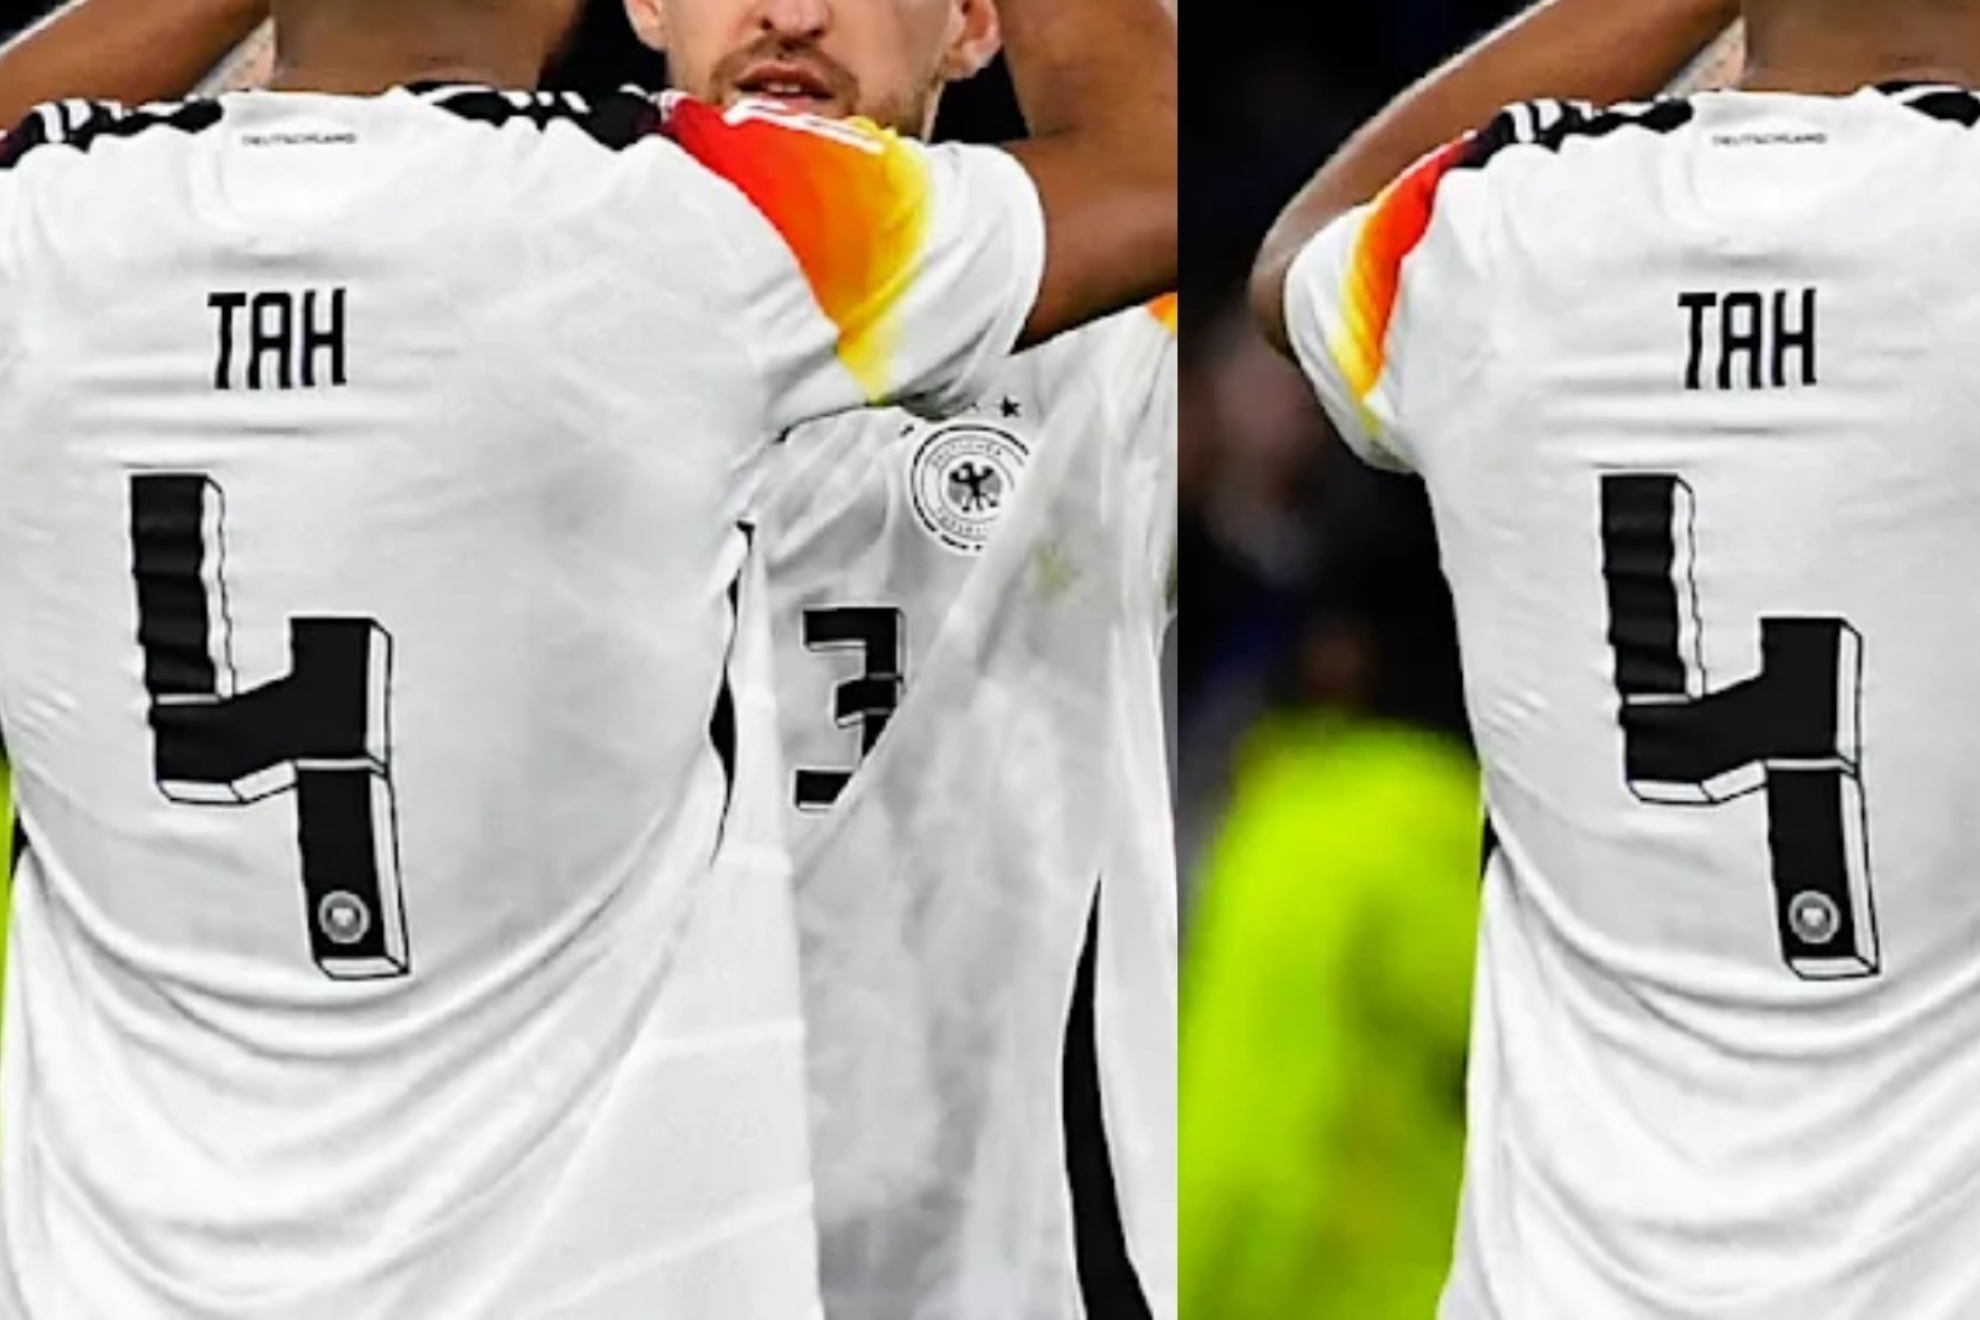 Adidas to remove the number 44 from Germanys shirt because of its resemblance to Nazi symbology